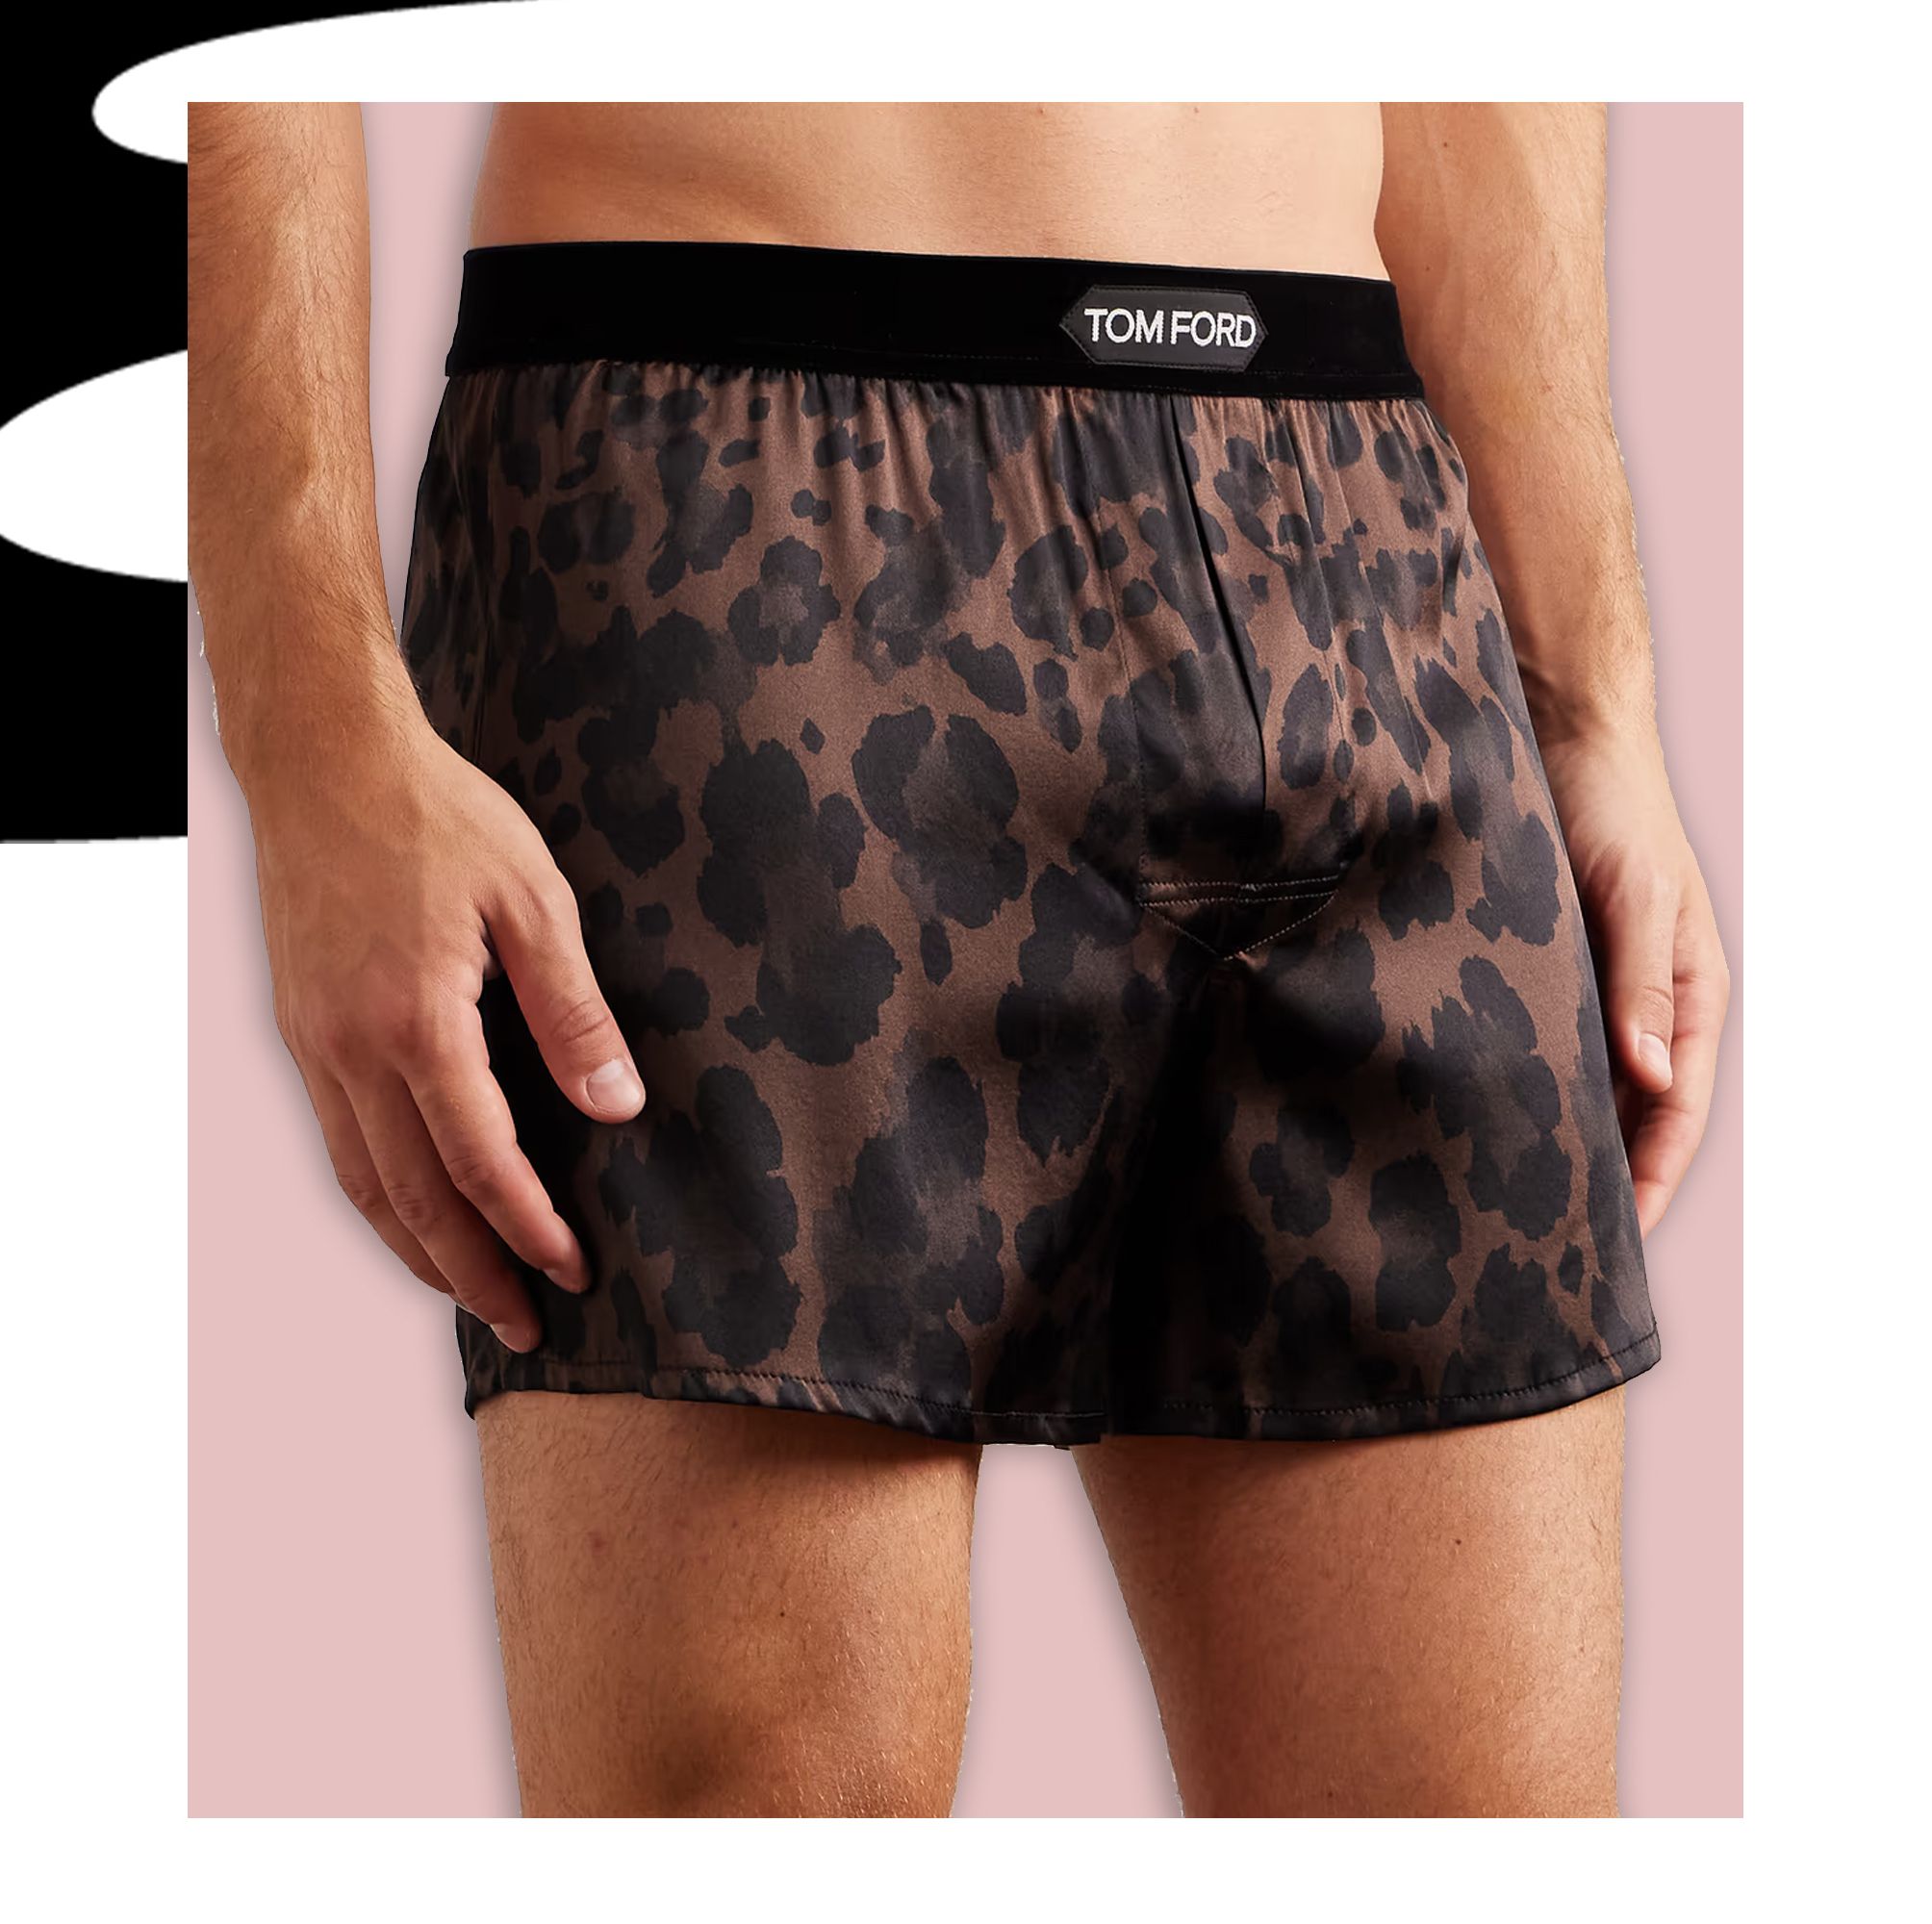 The 20 Best Boxer Shorts to Wear Every Day